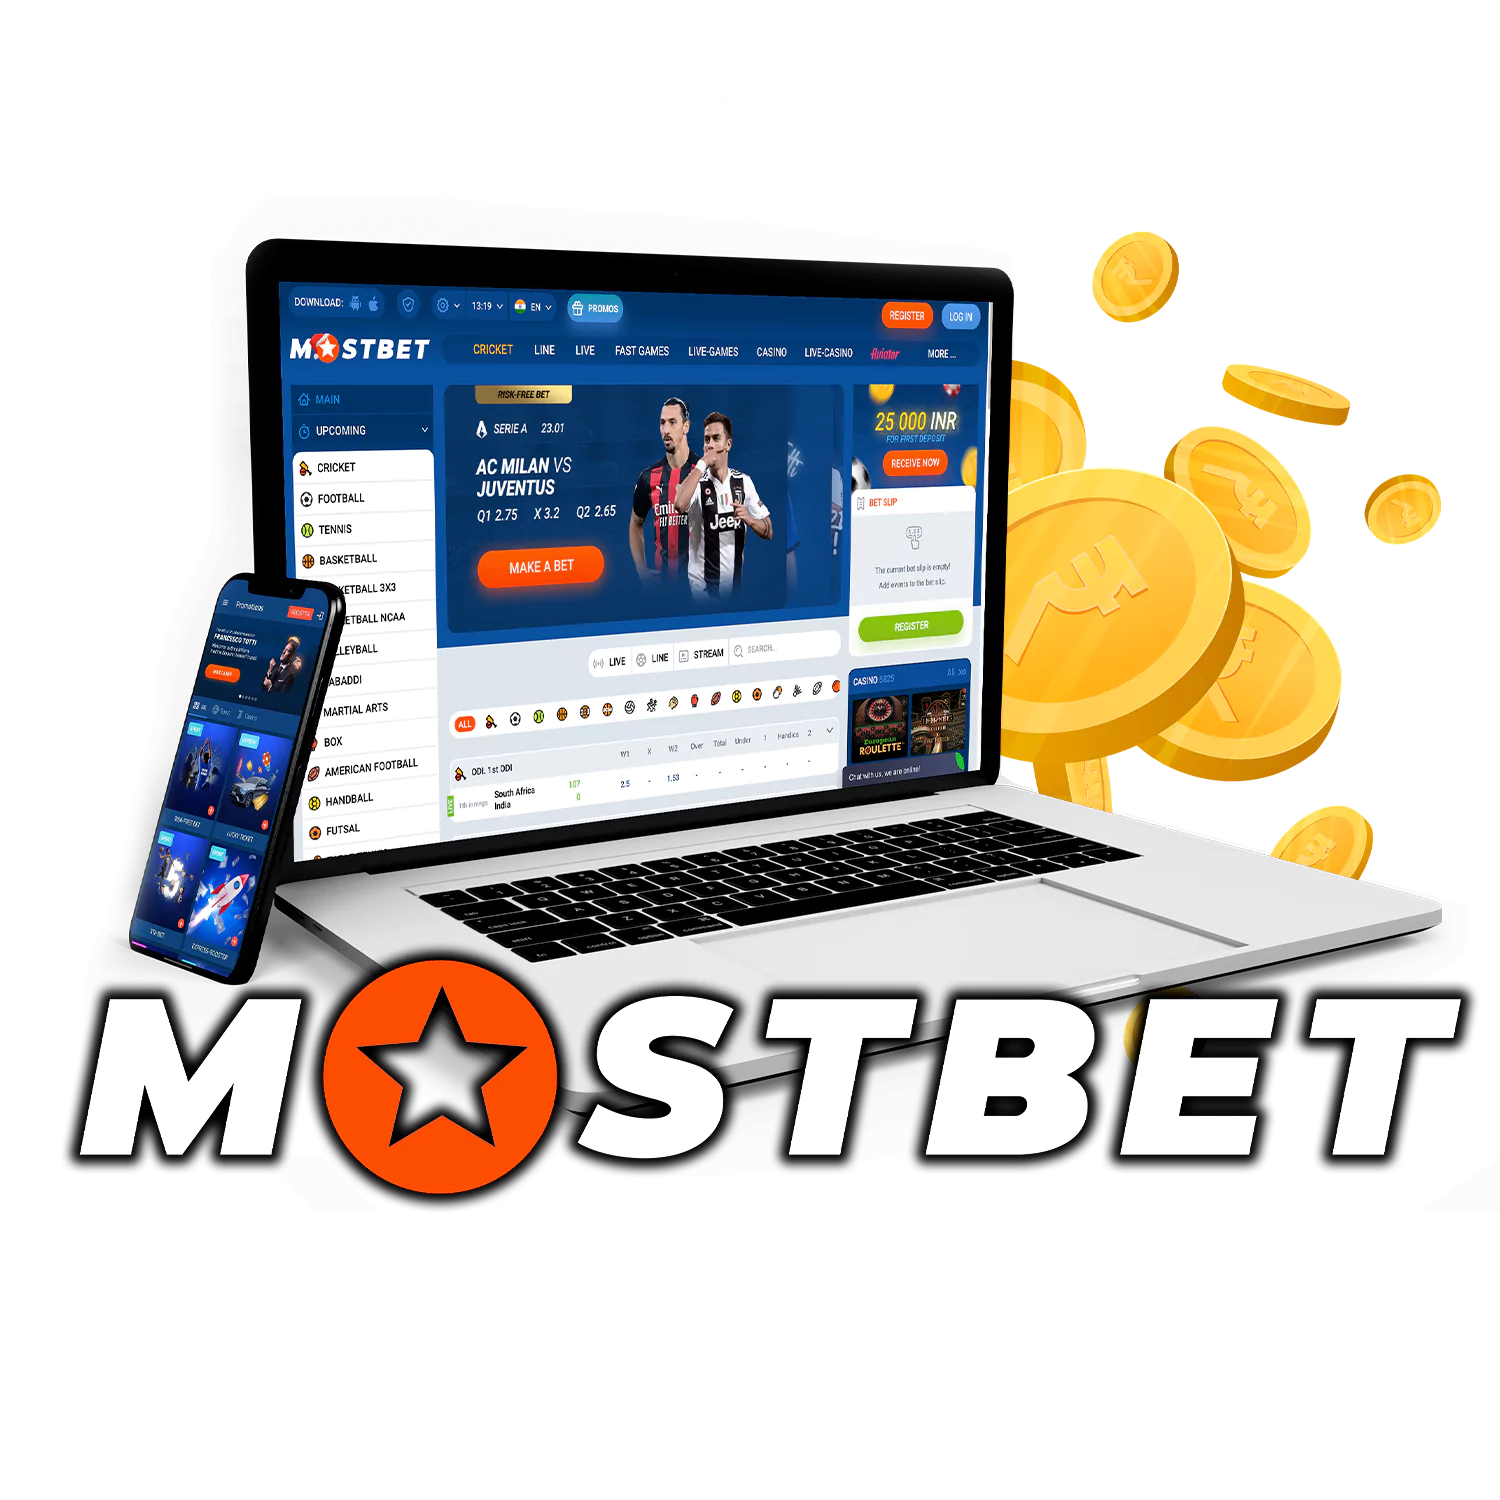 More on Mostbet UK: Get a signup bonus and more